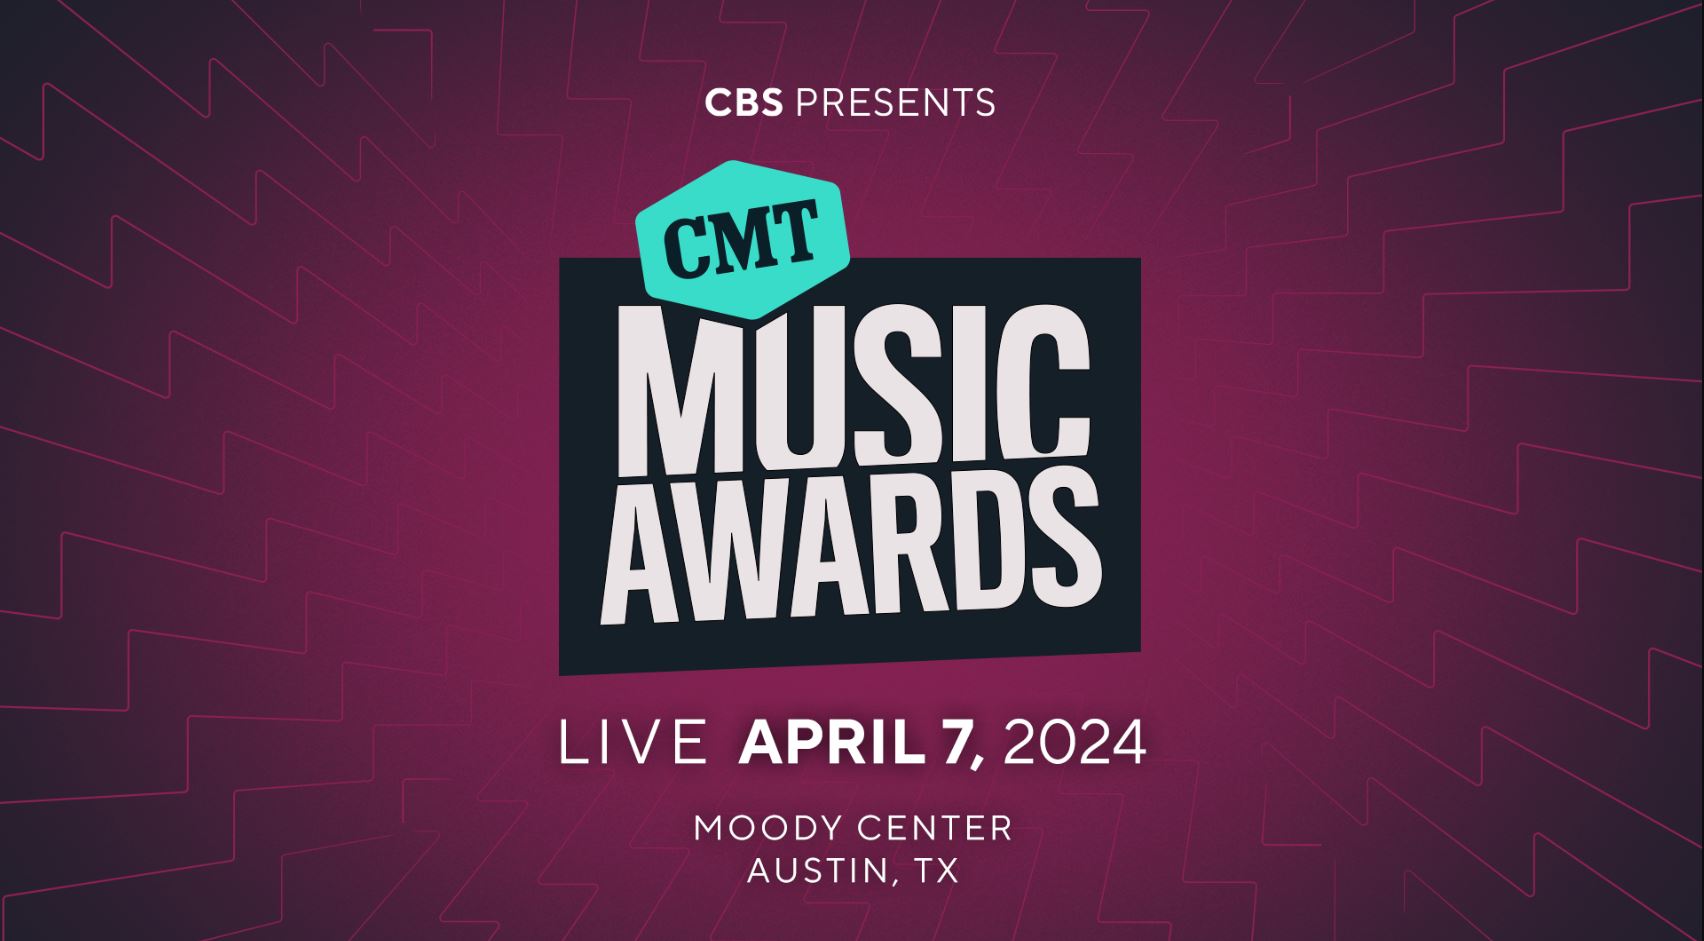 How to Watch the 2024 CMT Music Awards Without Cable